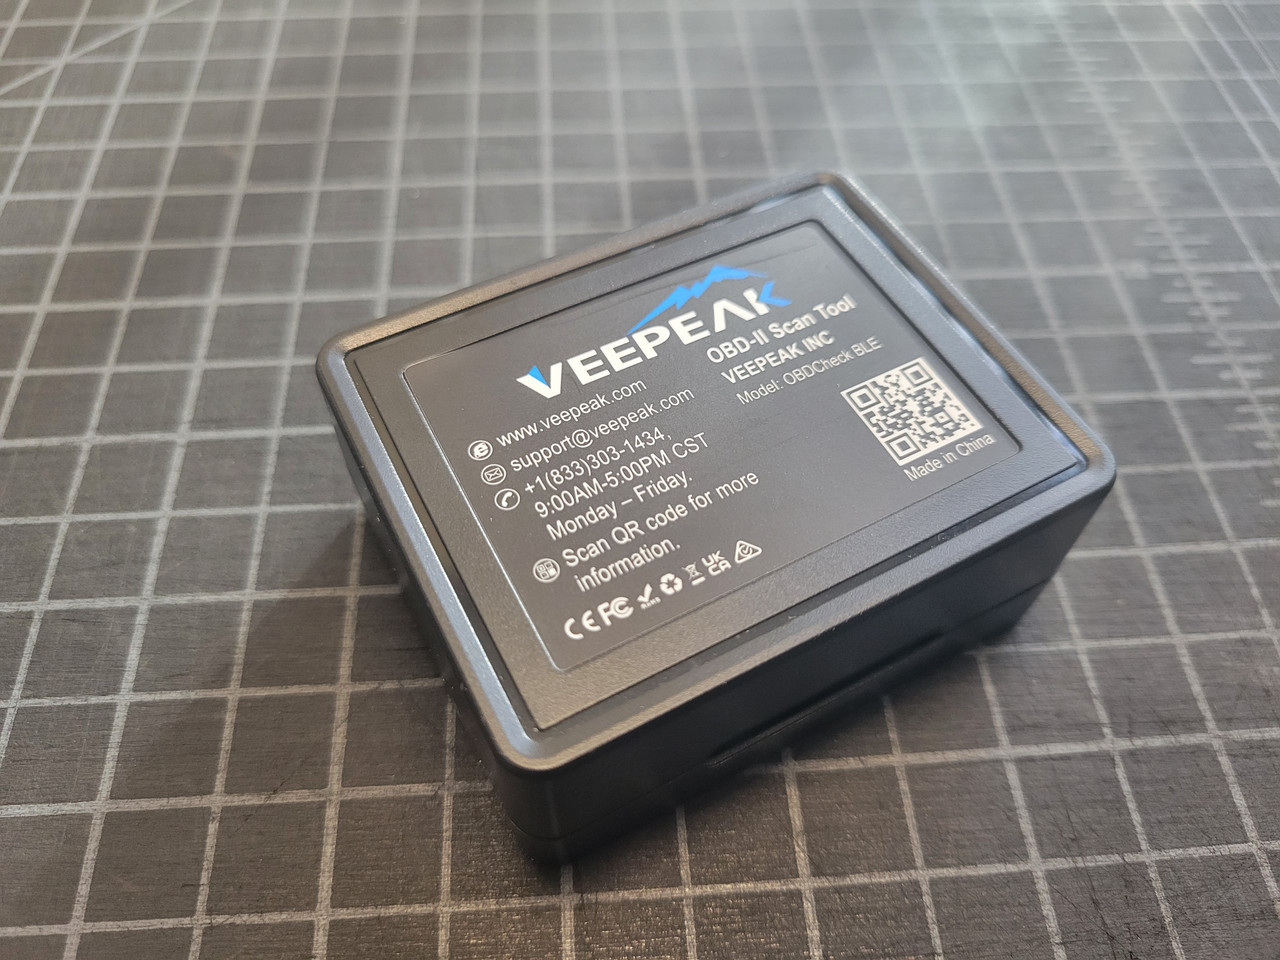 VeePeak Bluetooth OBDII Diagnostic Tool with the included case with manufacturer info